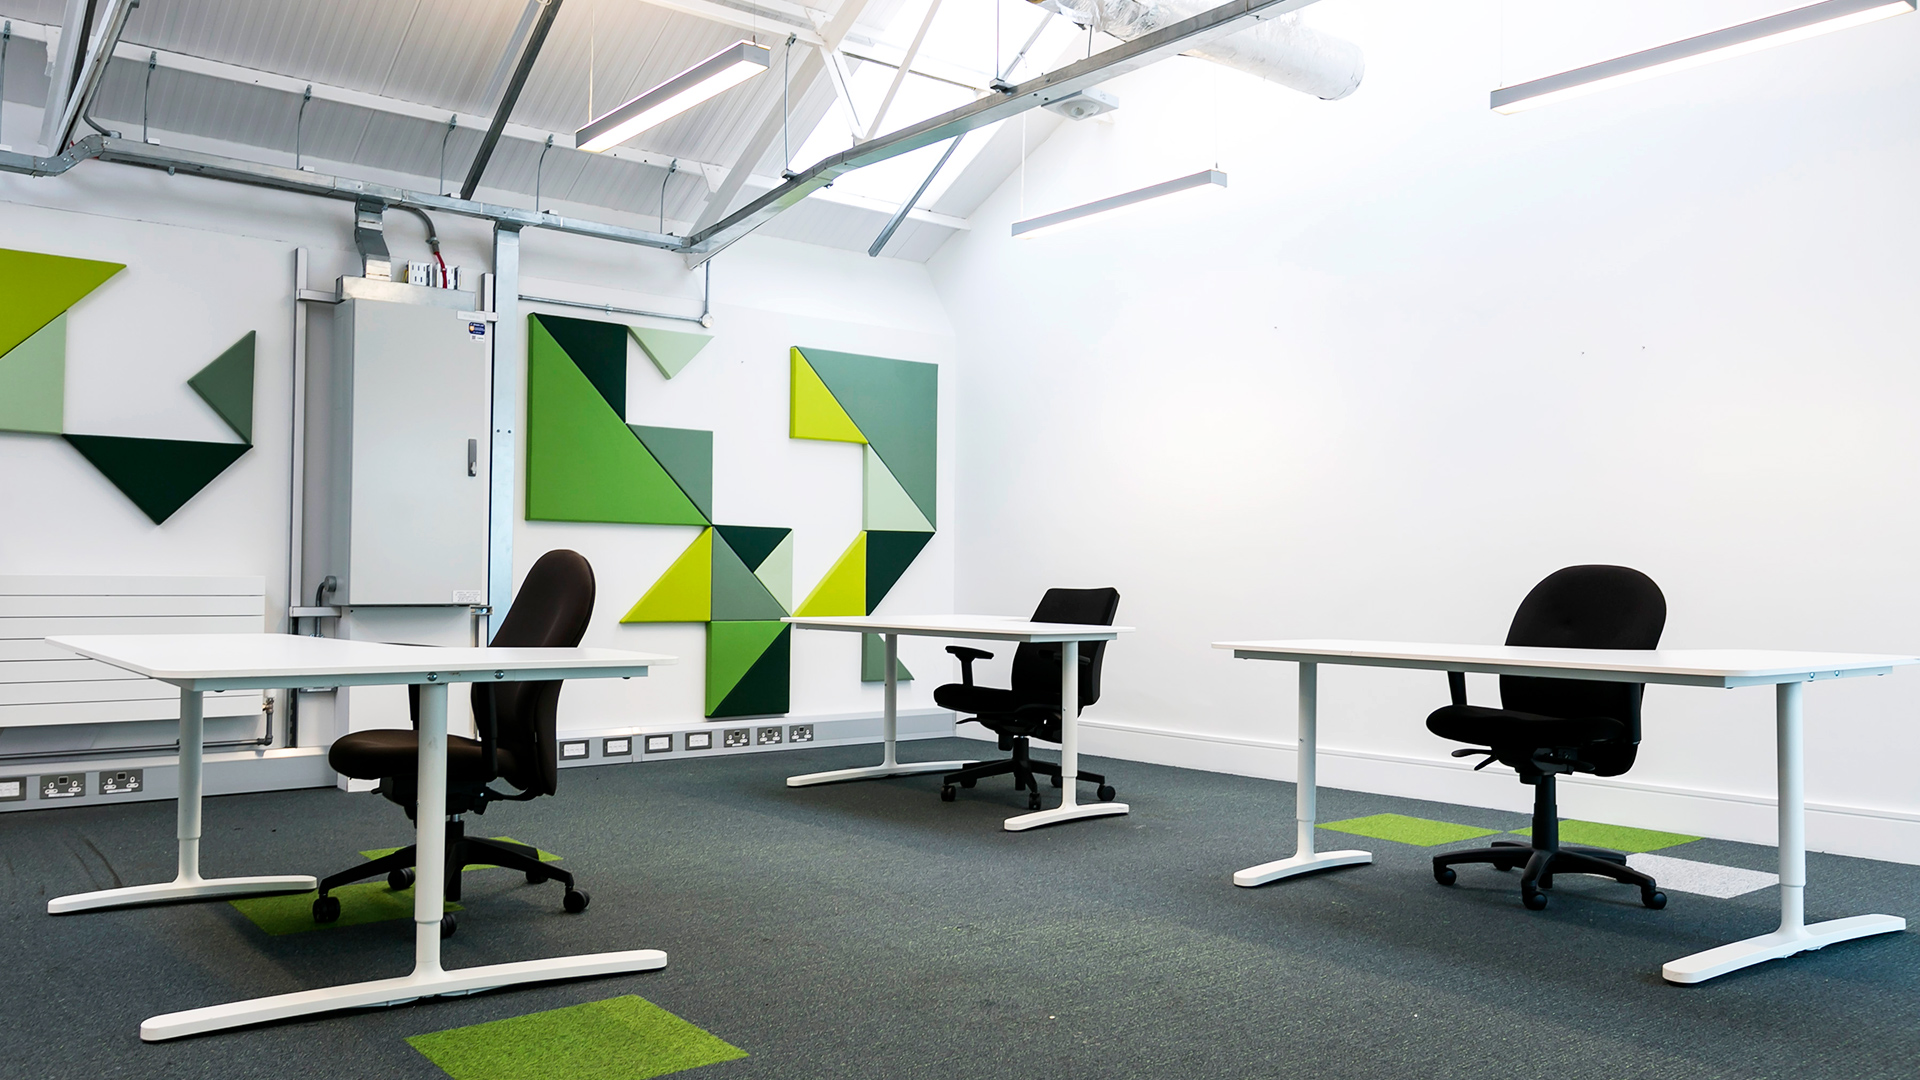 A bright and light office space with desks and green geometric murals on the white walls